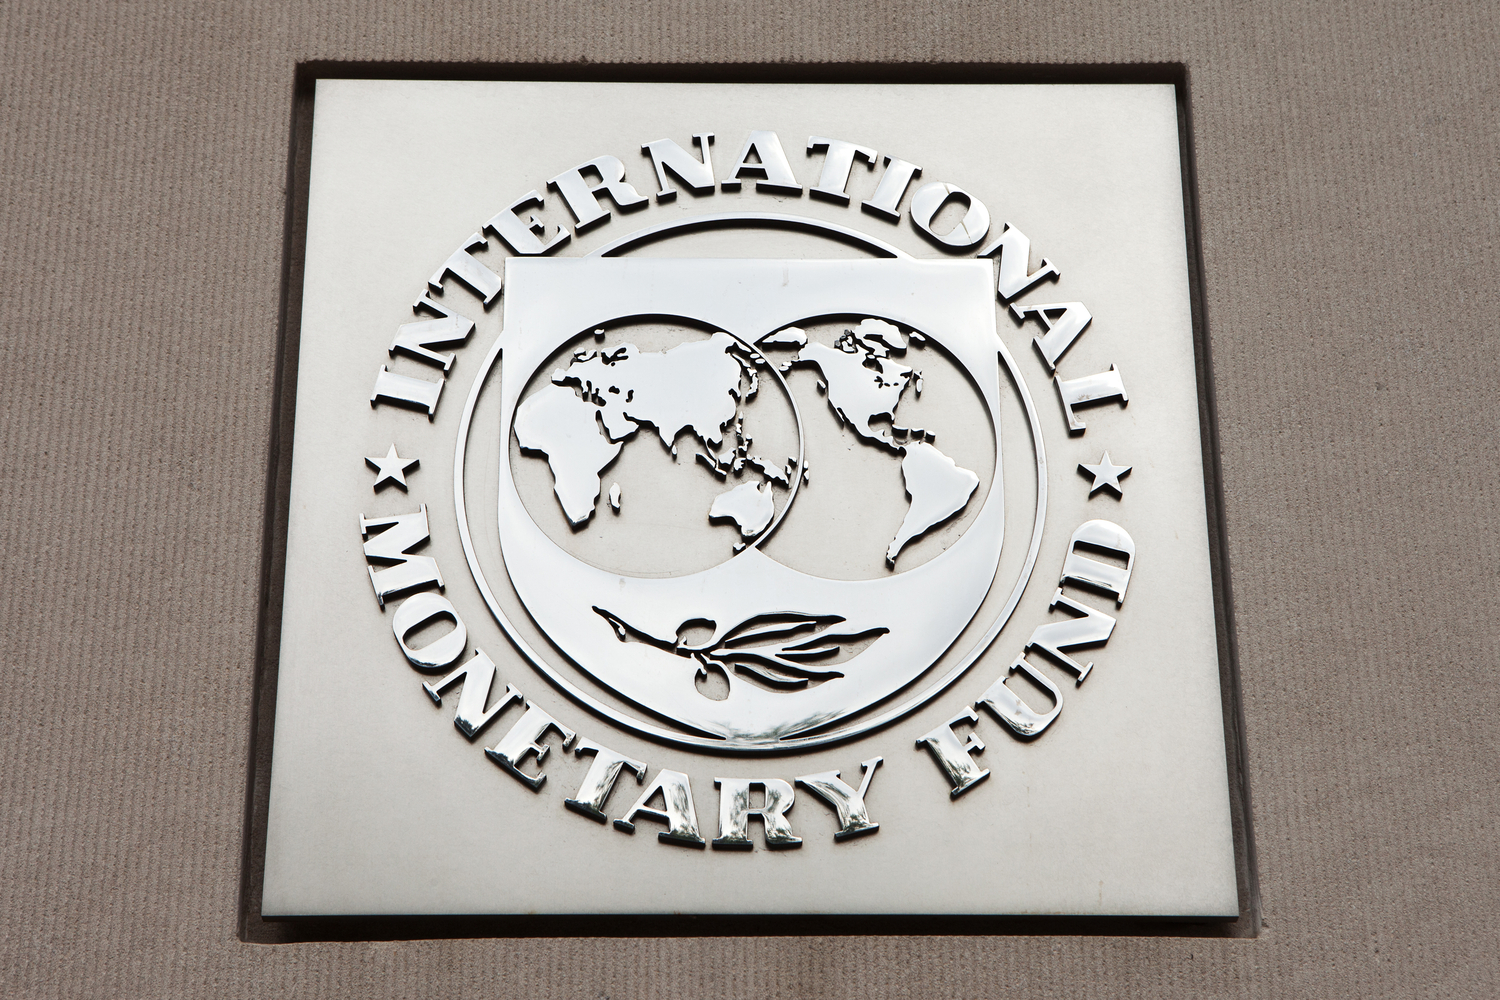 Private Firms Can Boost Central Bank Digital Currencies, IMF Official Says